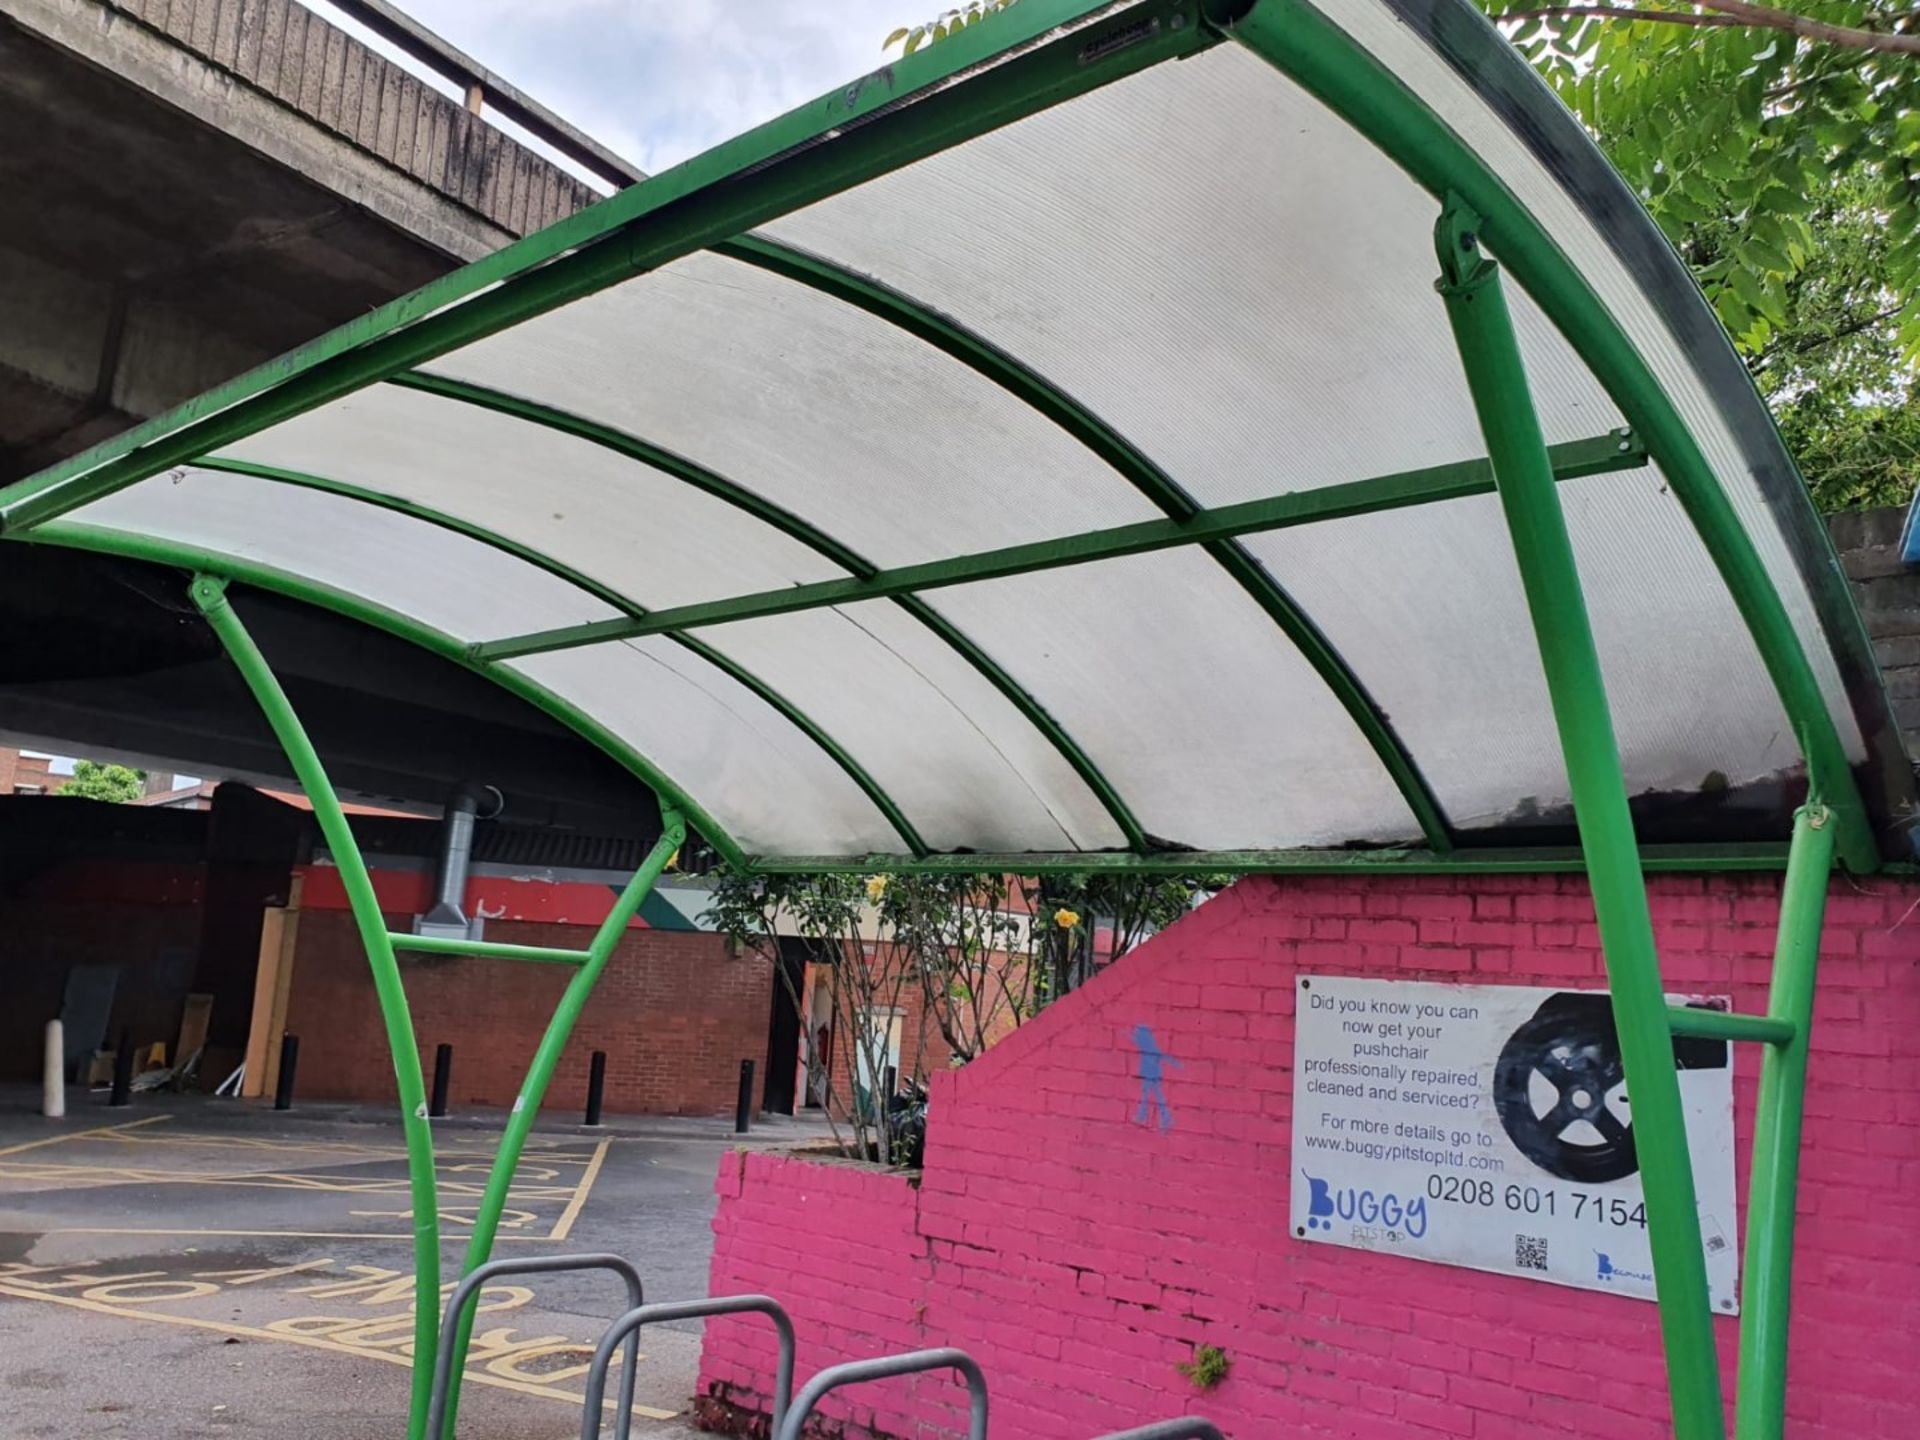 1 x Bike Shelter With Bike Racks - Suitable For Upto 8 Bikes - Contemporary Design - Suitable For - Image 5 of 9